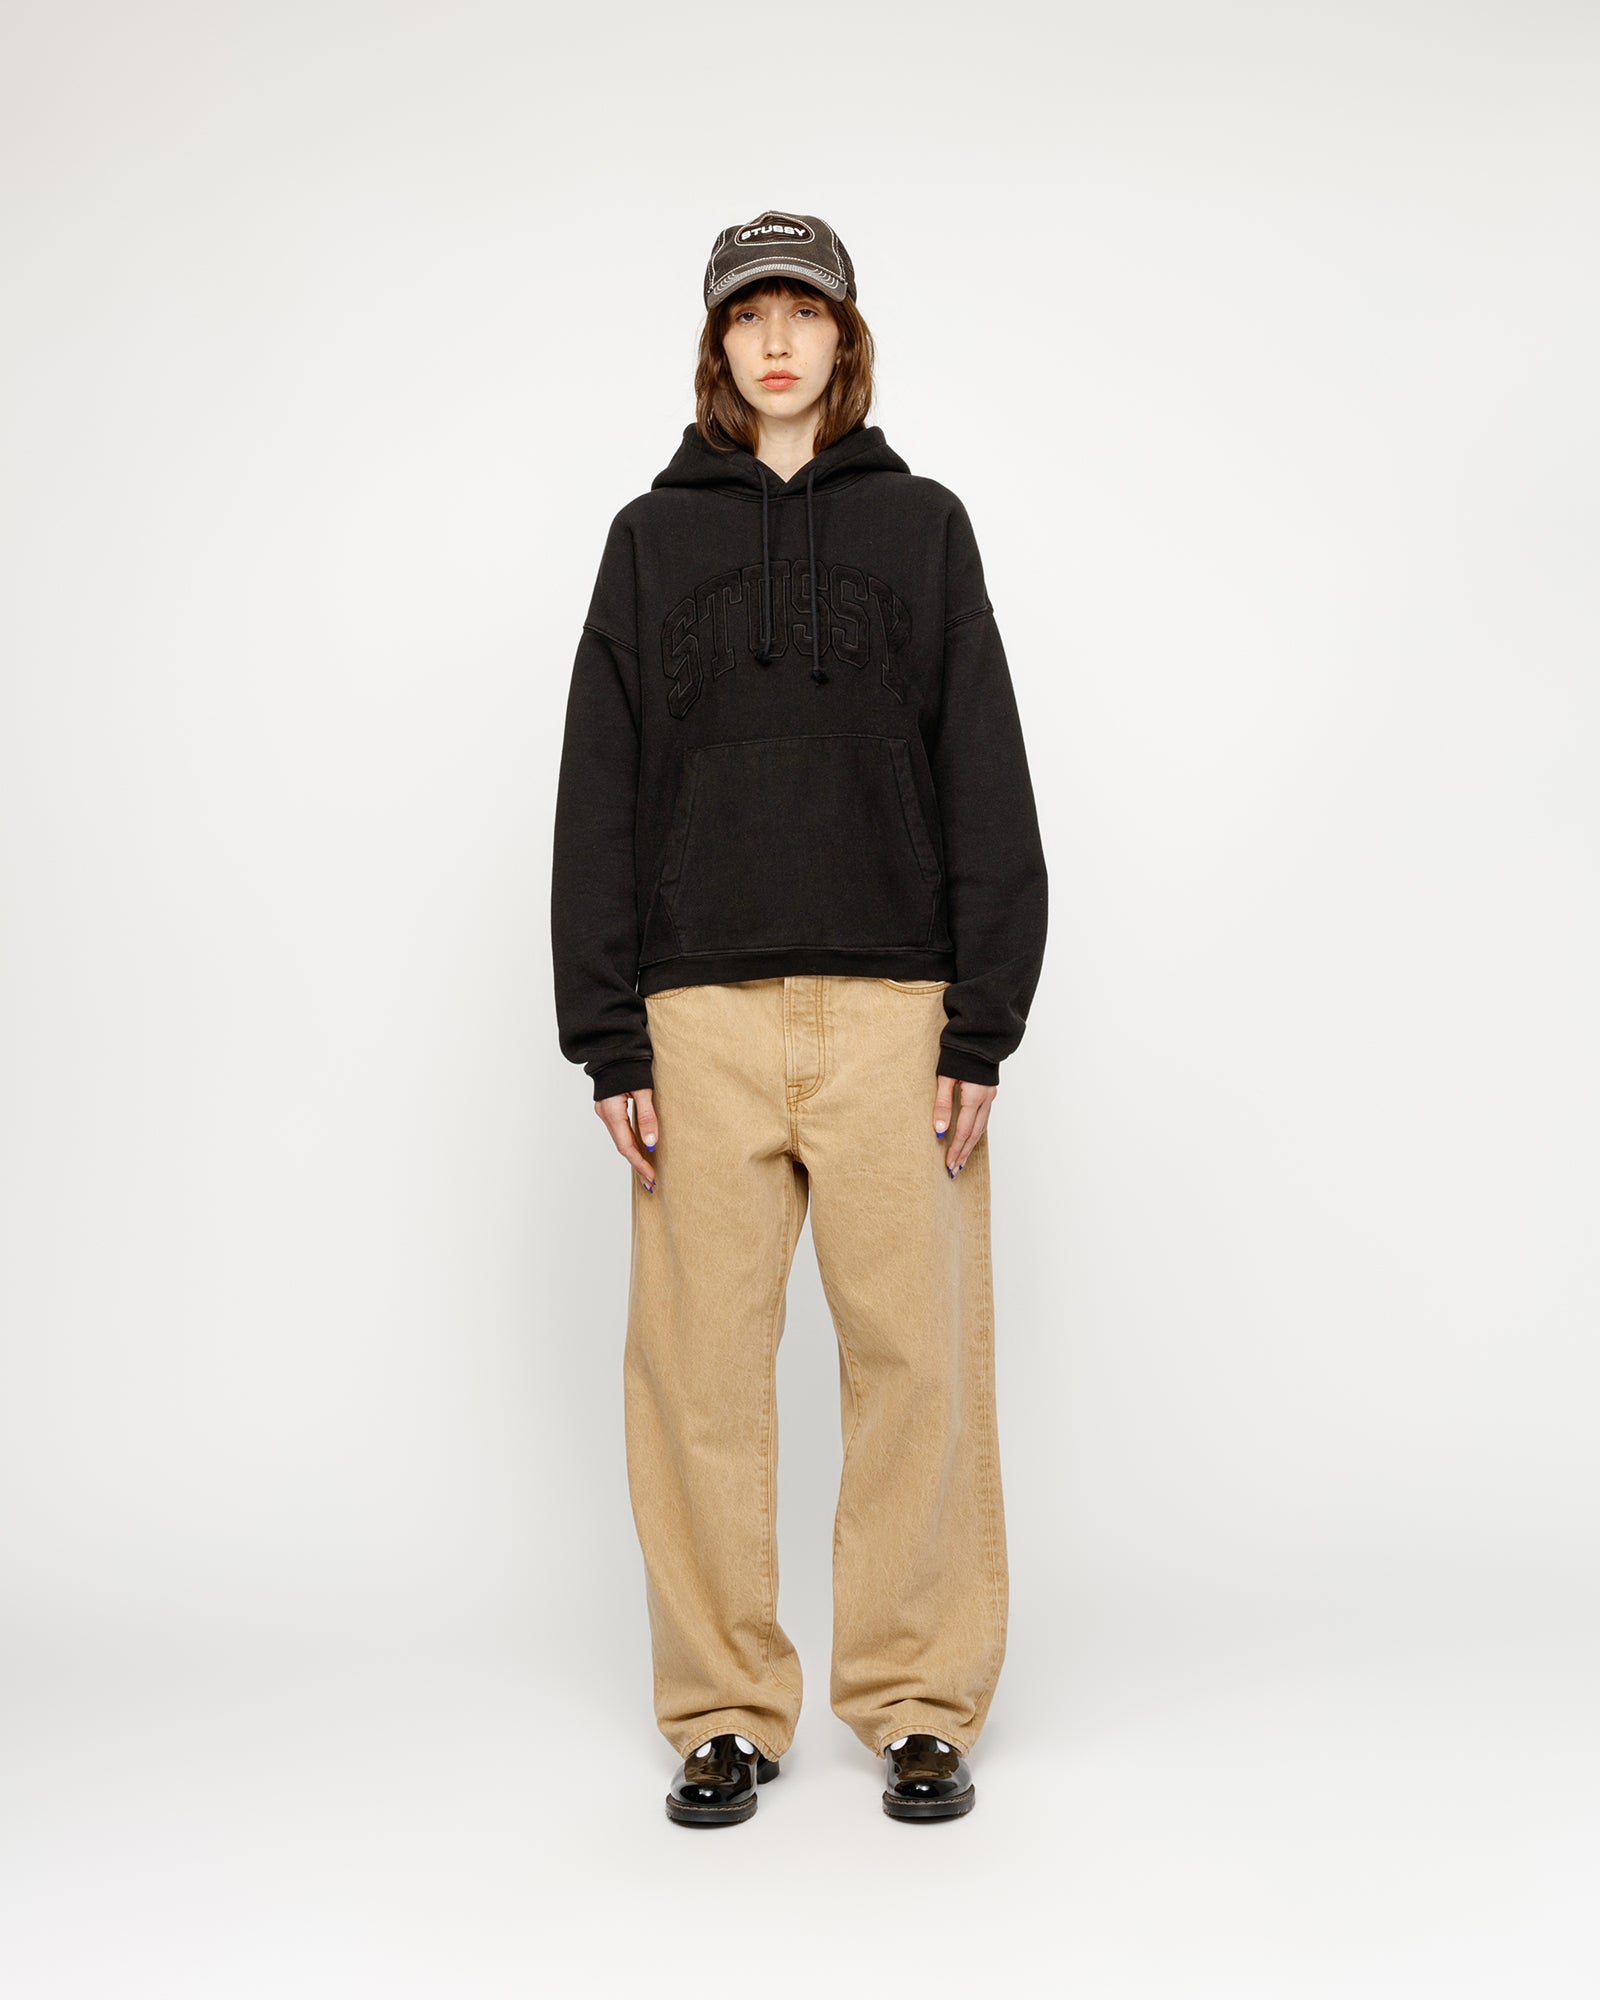 Stüssy Embroidered Relaxed Hoodie Washed Black Sweats